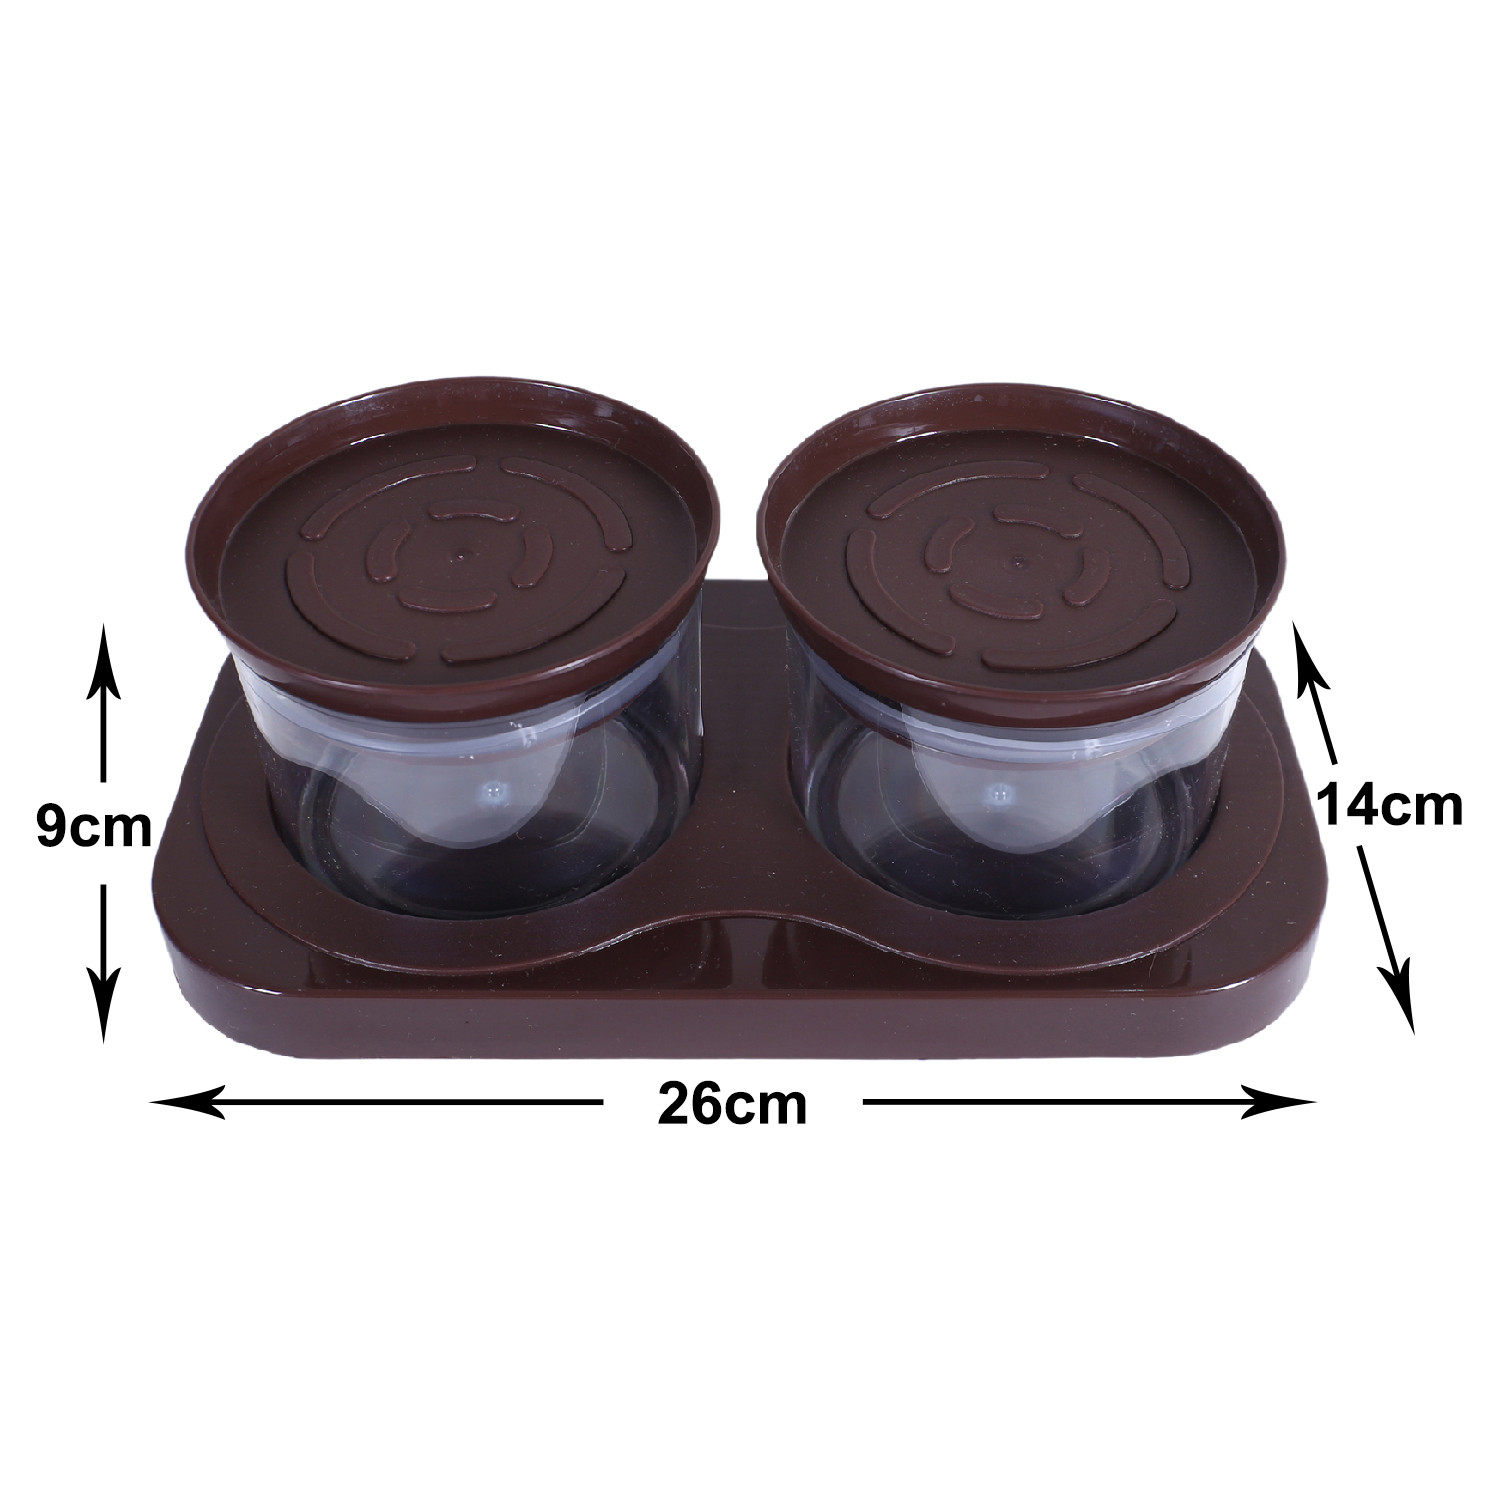 Kuber Industries 2 Containers & Tray Set|Unbreakable Plastic Snackers,Cookies,Nuts Serving Tray|Airtight Containers with Lid,350 ml (Brown)